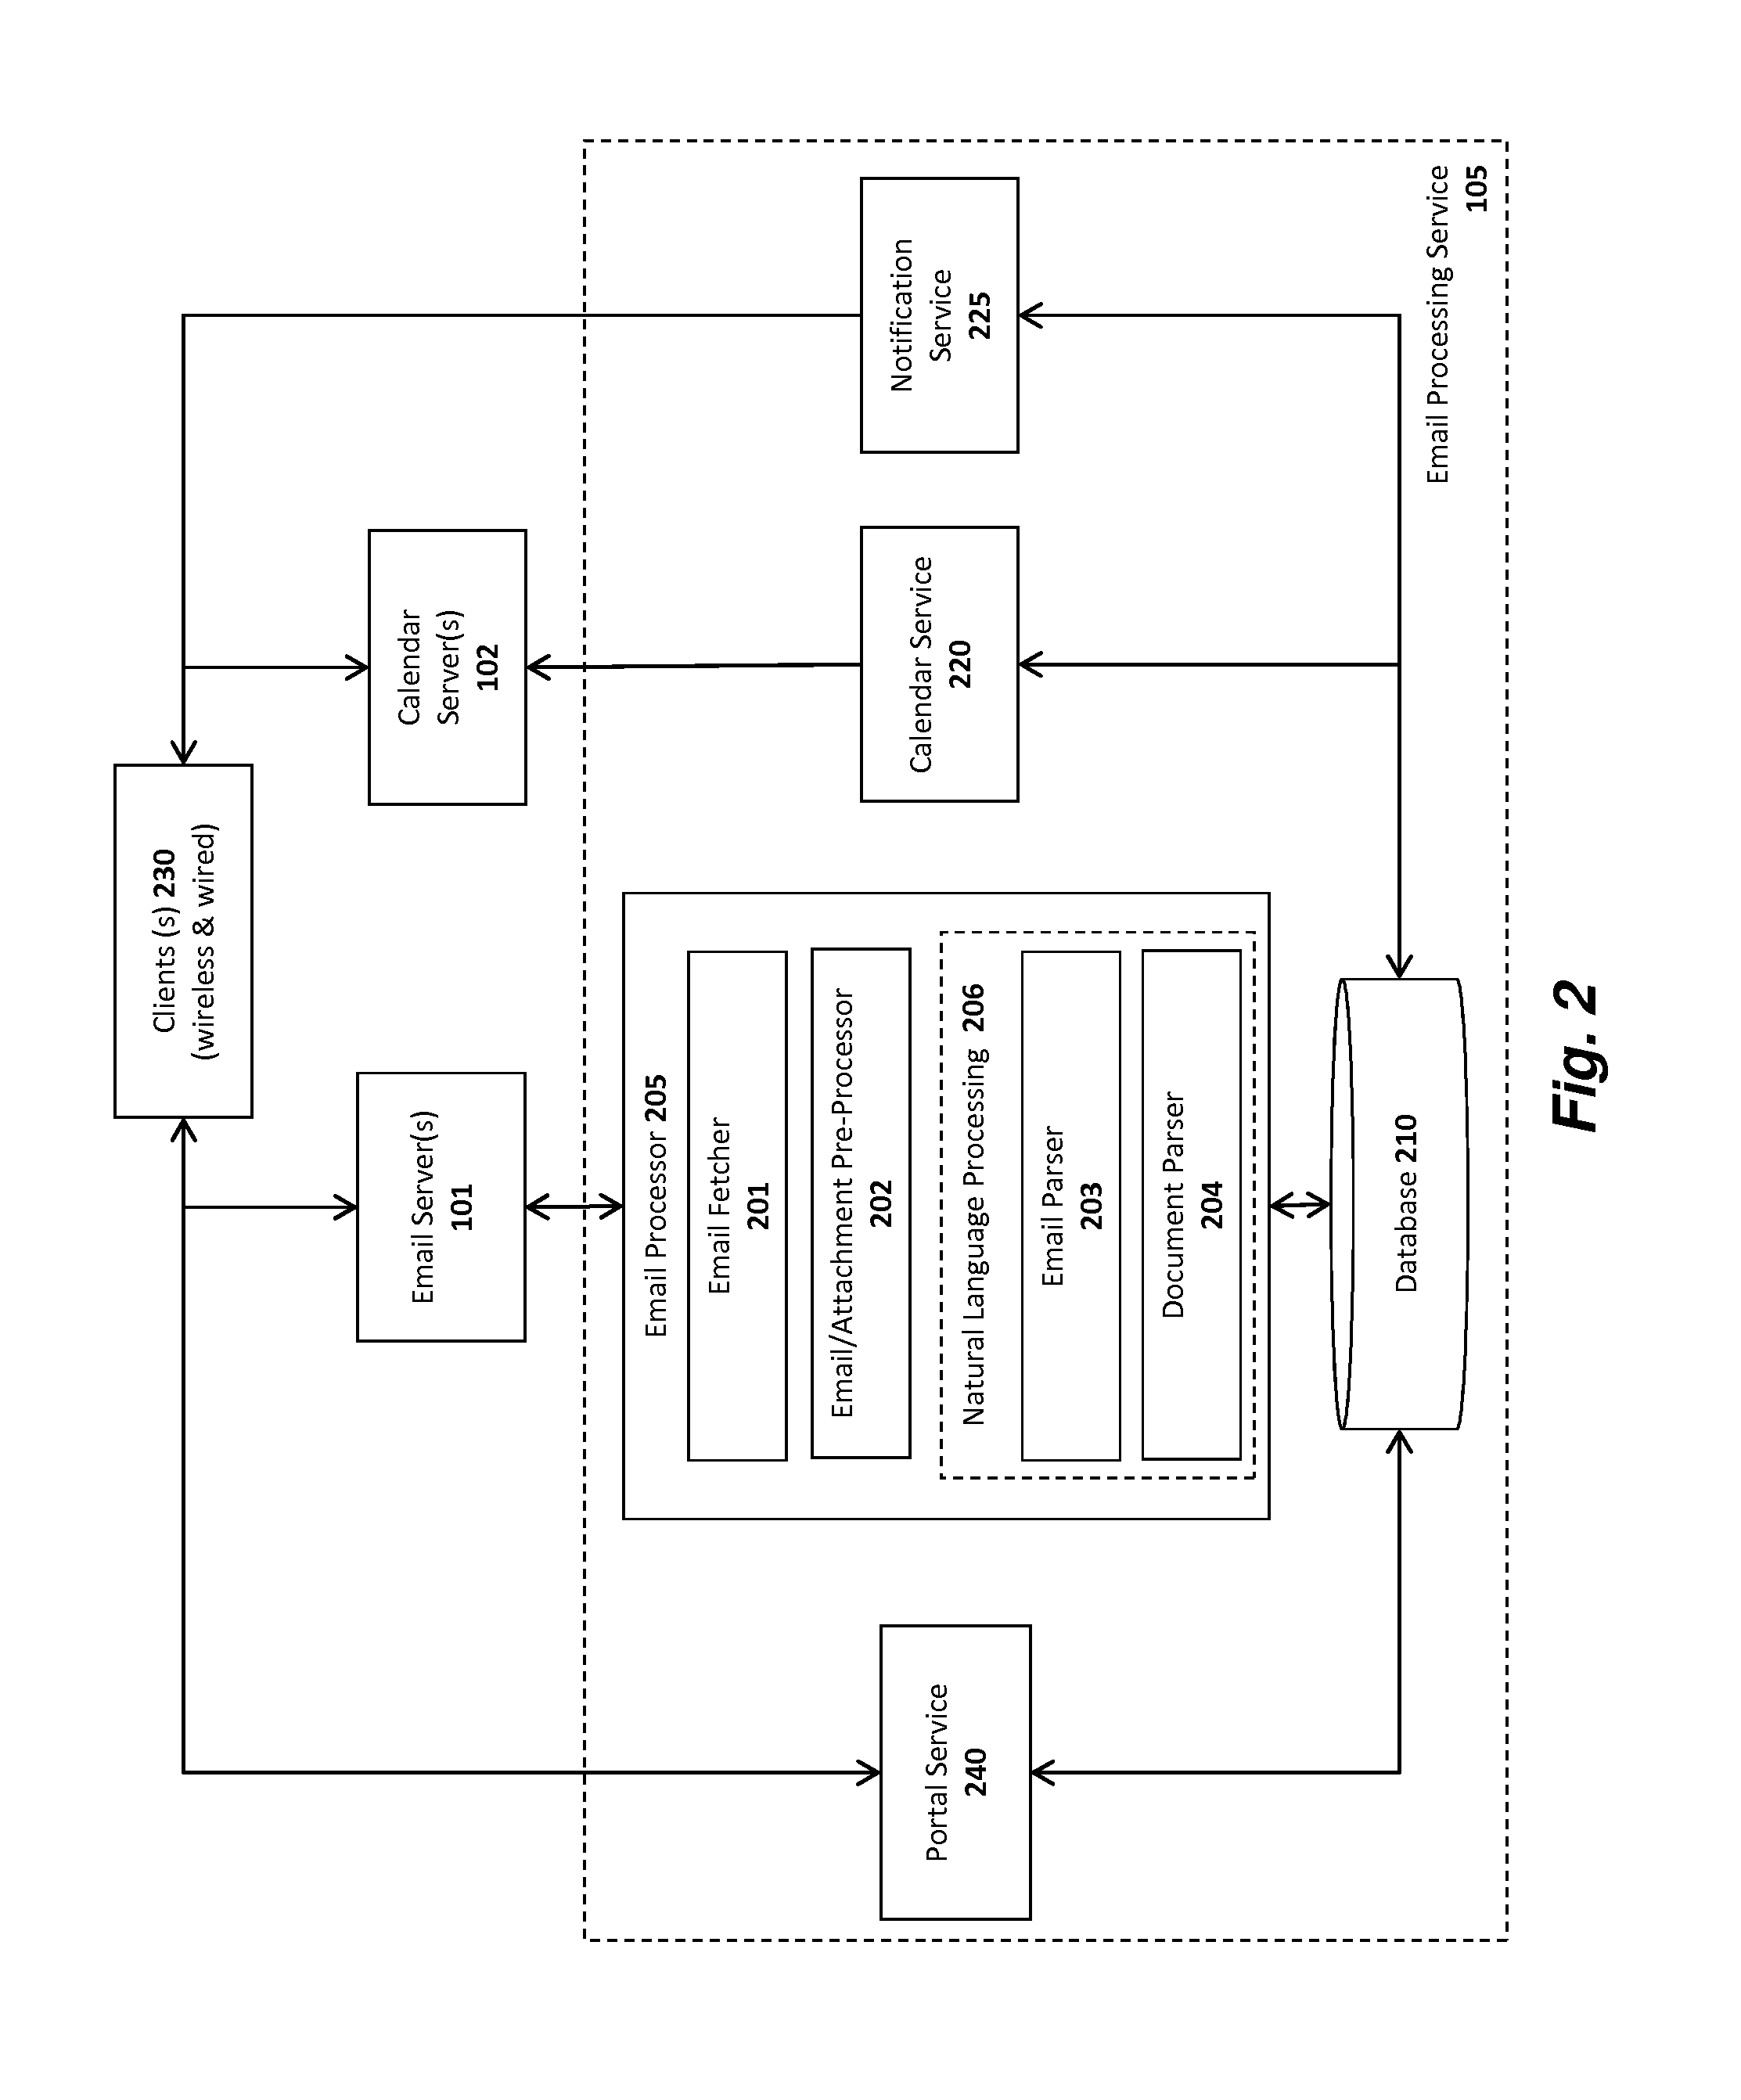 System and method for extracting calendar events from free-form email